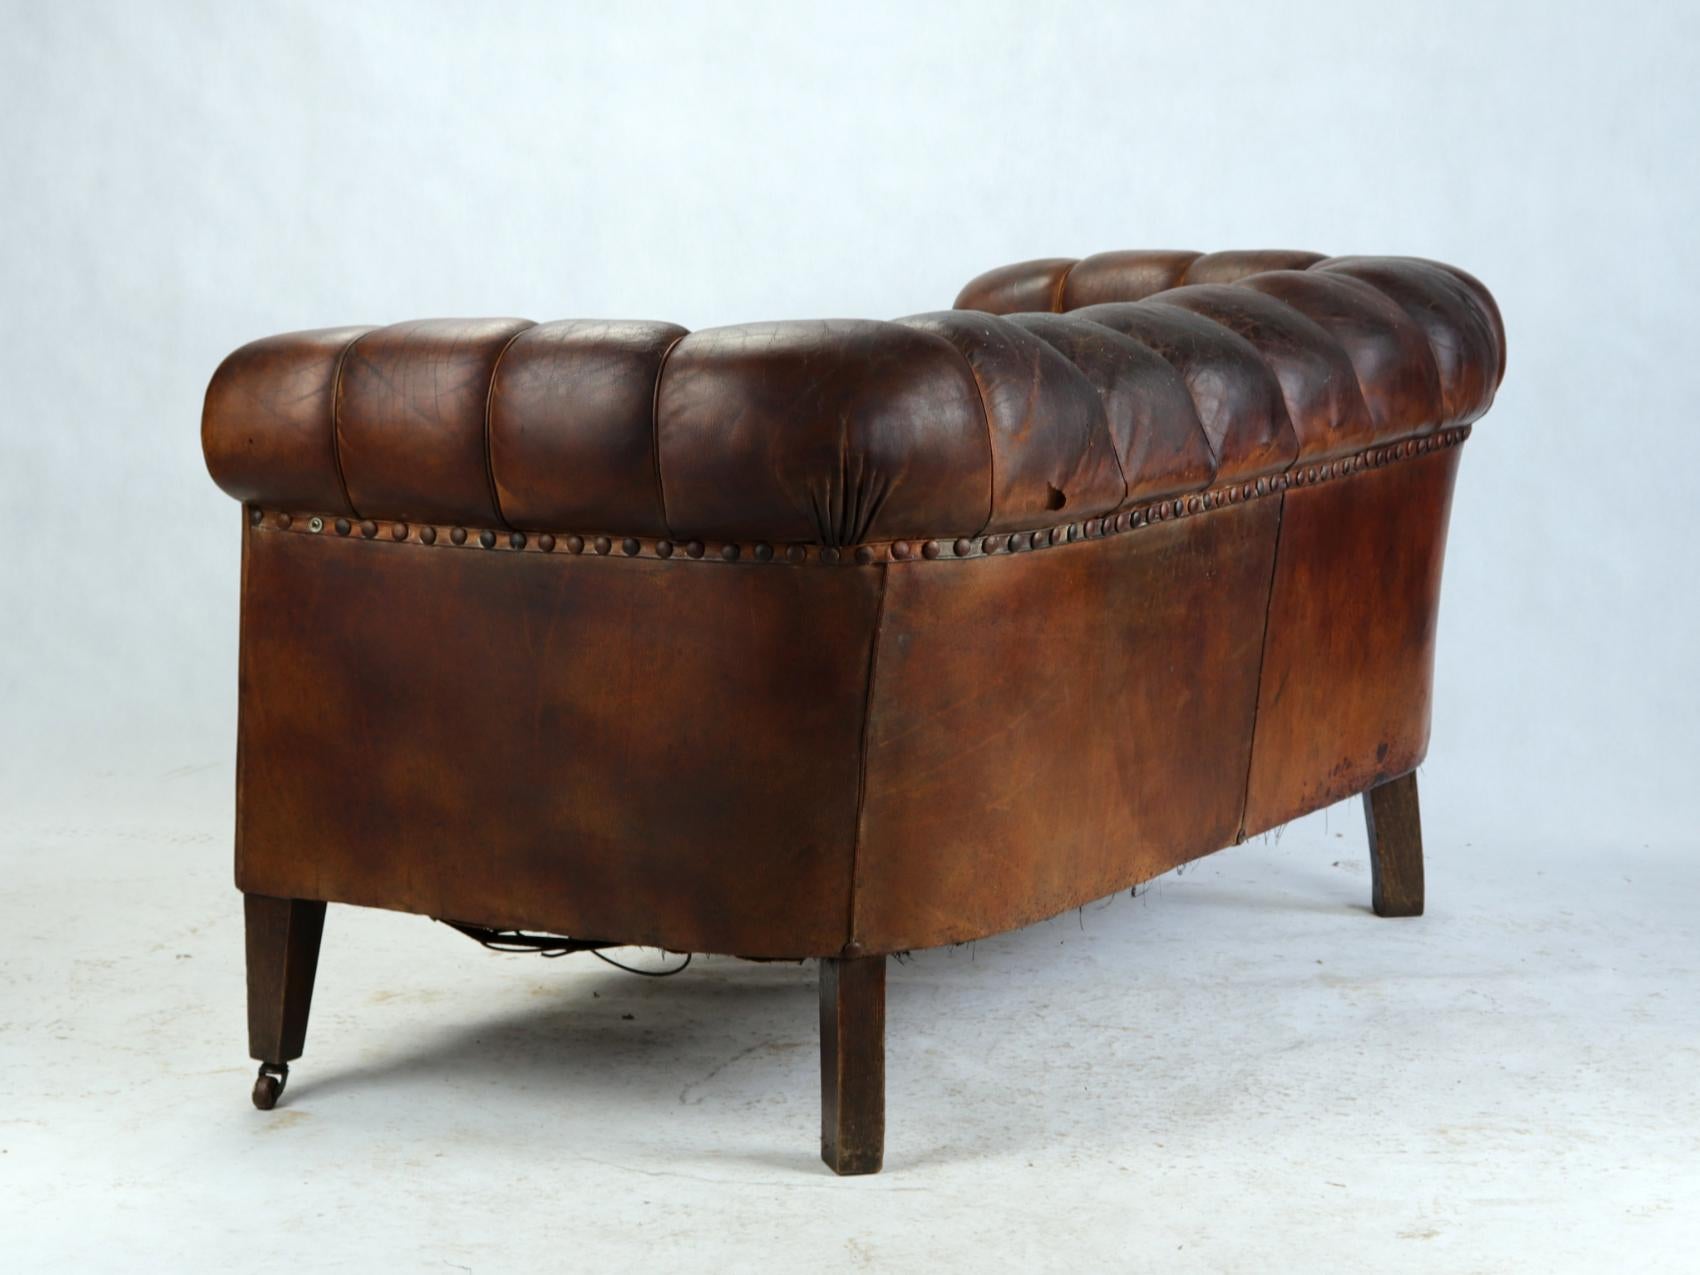 20th Century Art Deco Leather Club Chairs or Armchairs and Sofa, Seating Set, circa 1920